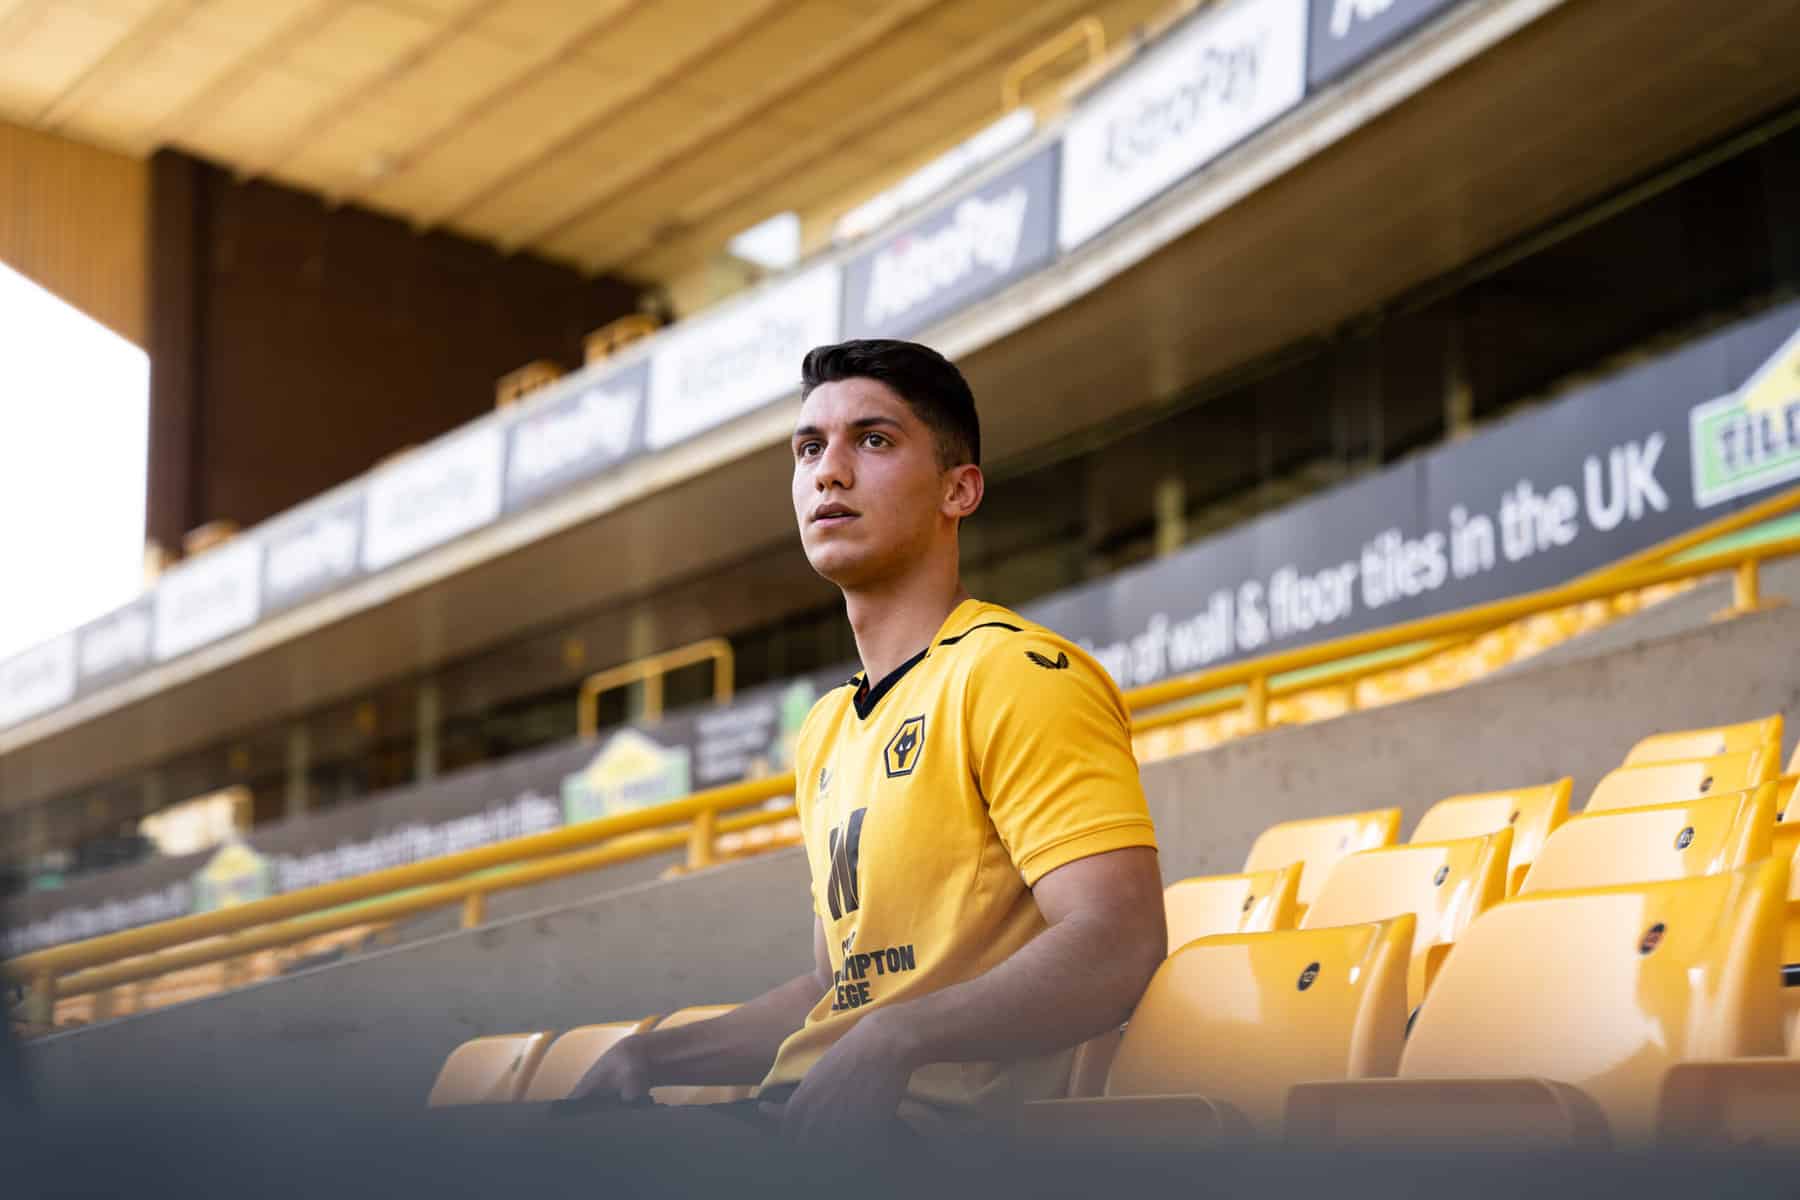 Football’s universal language with Wolves Foundation Image